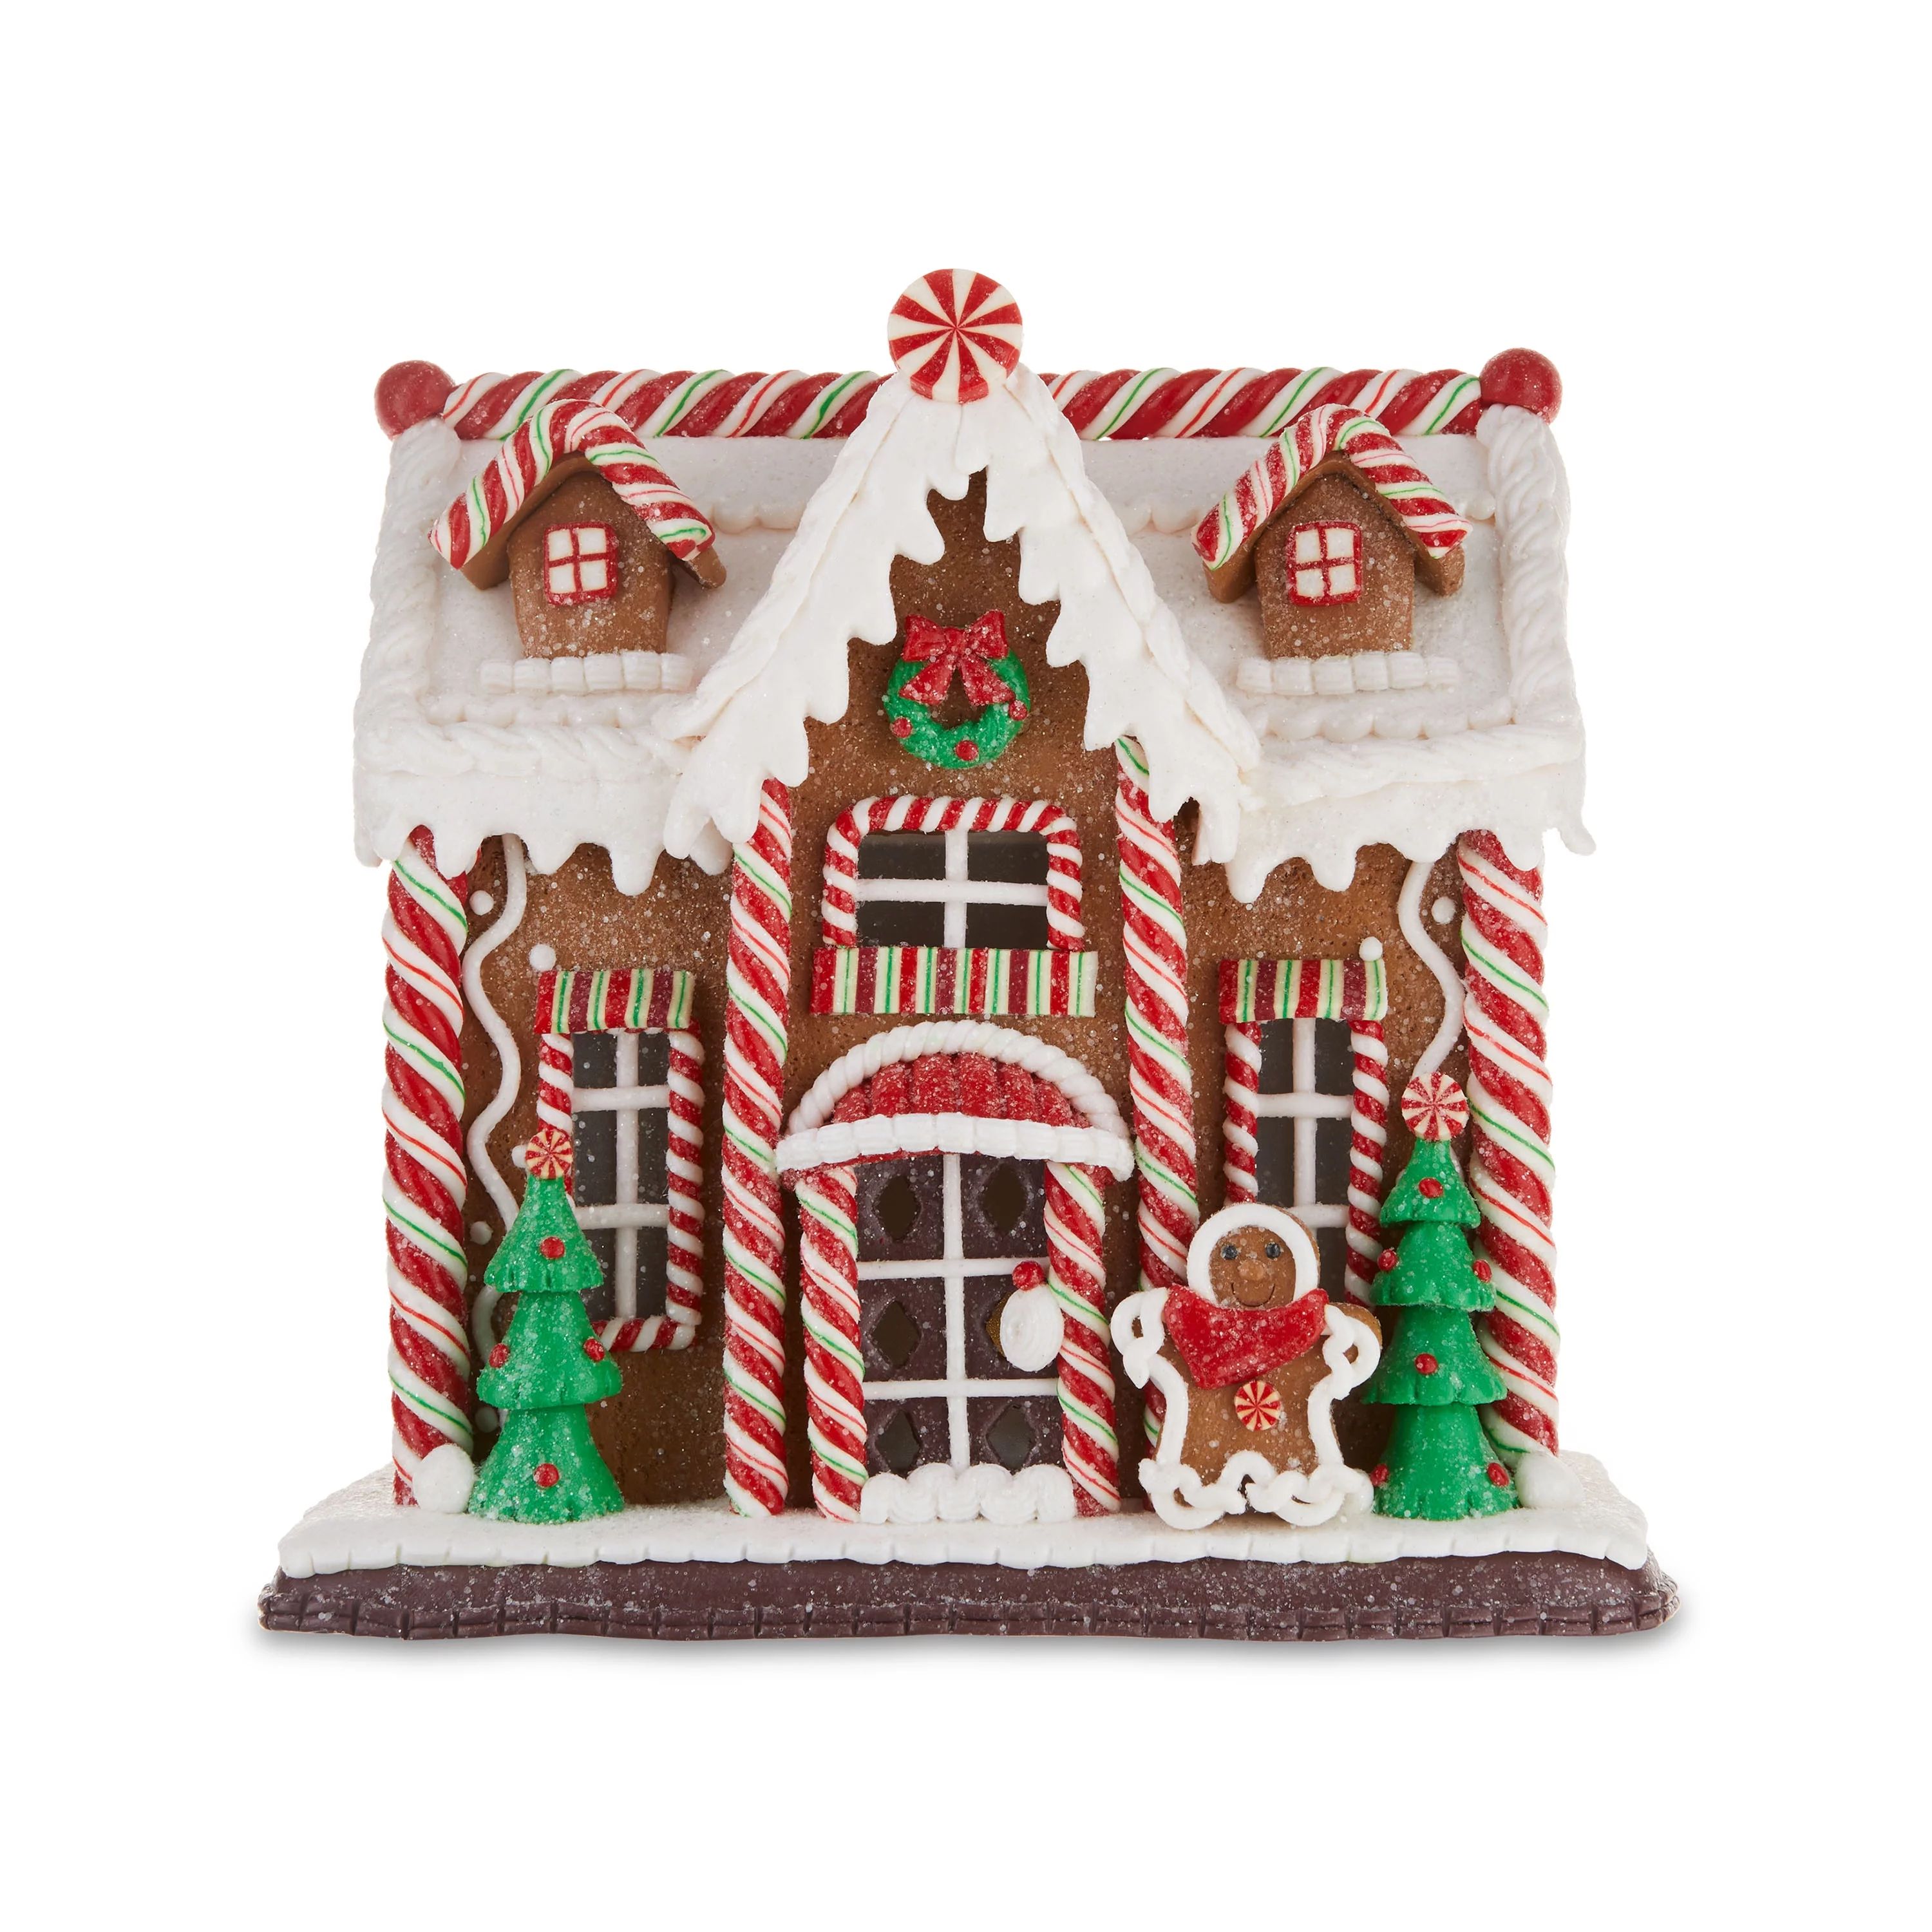 Christmas Village Light-Up Gingerbread House, 9", by Holiday Time | Walmart (US)